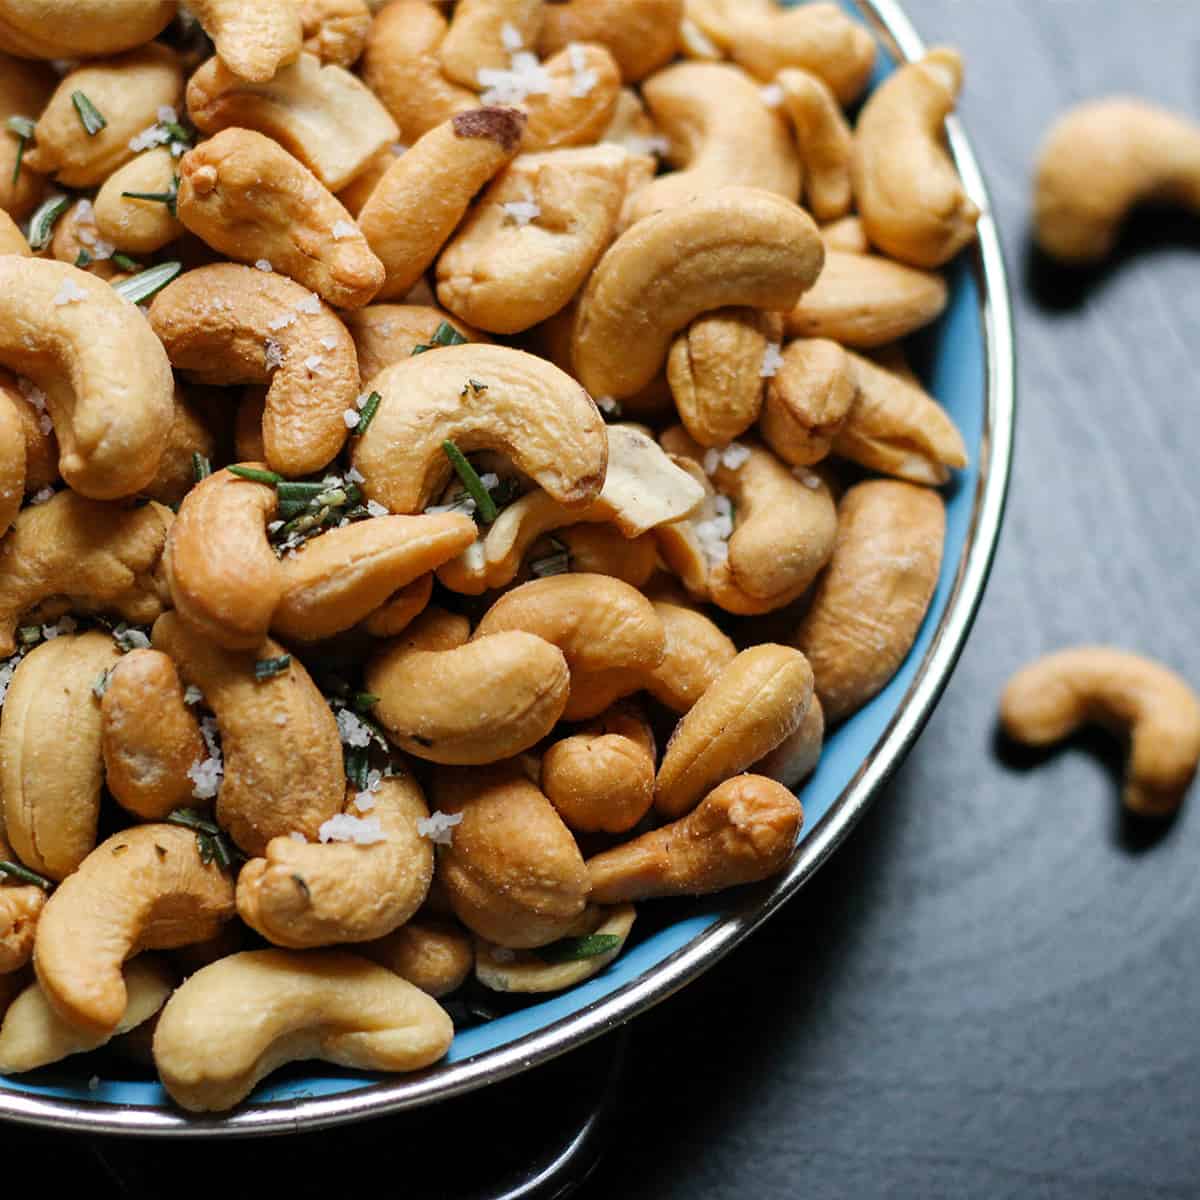 Cashews in a blue bowl on a blue table